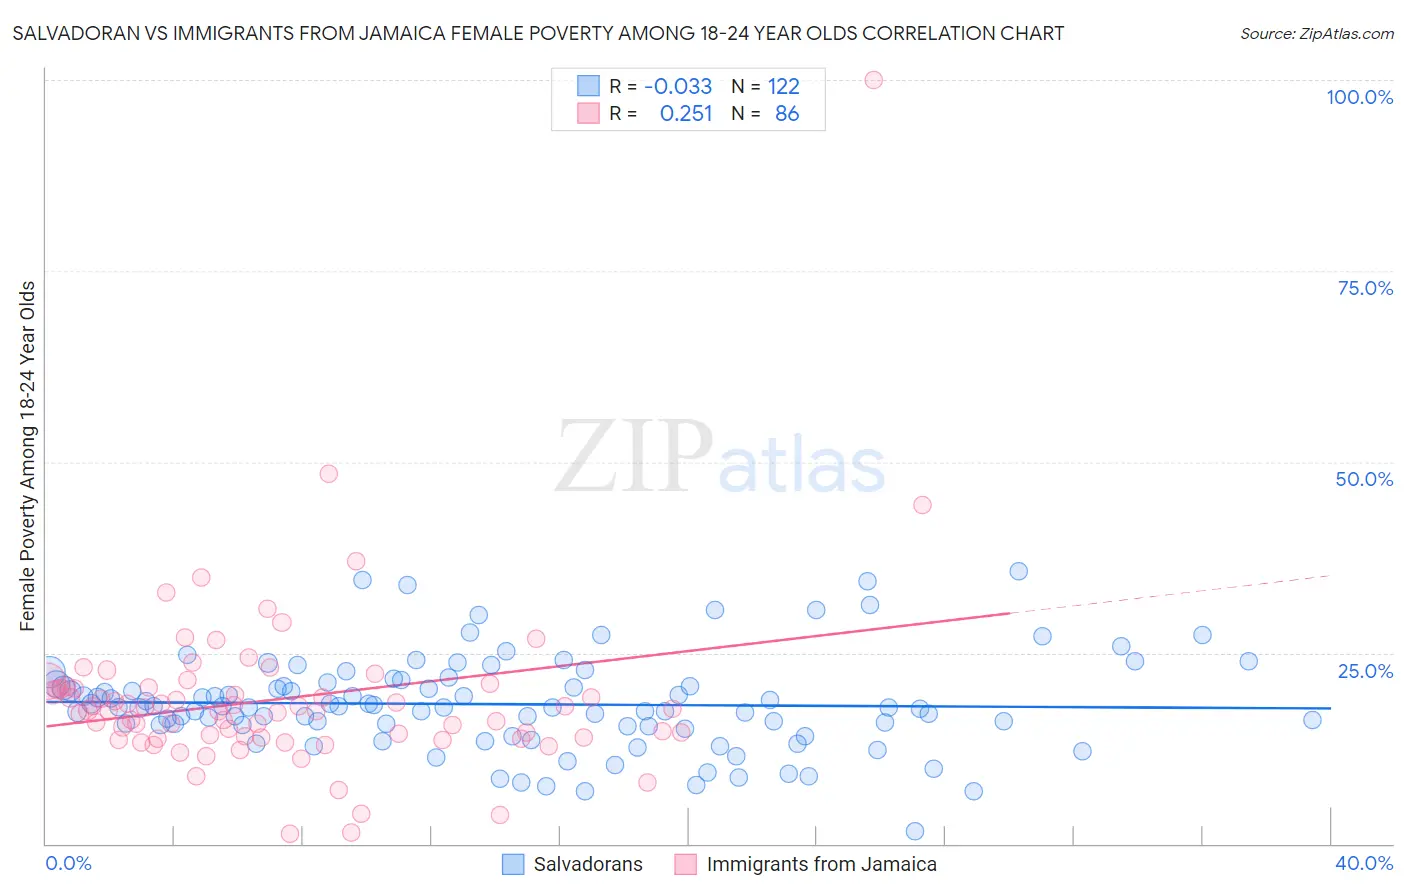 Salvadoran vs Immigrants from Jamaica Female Poverty Among 18-24 Year Olds